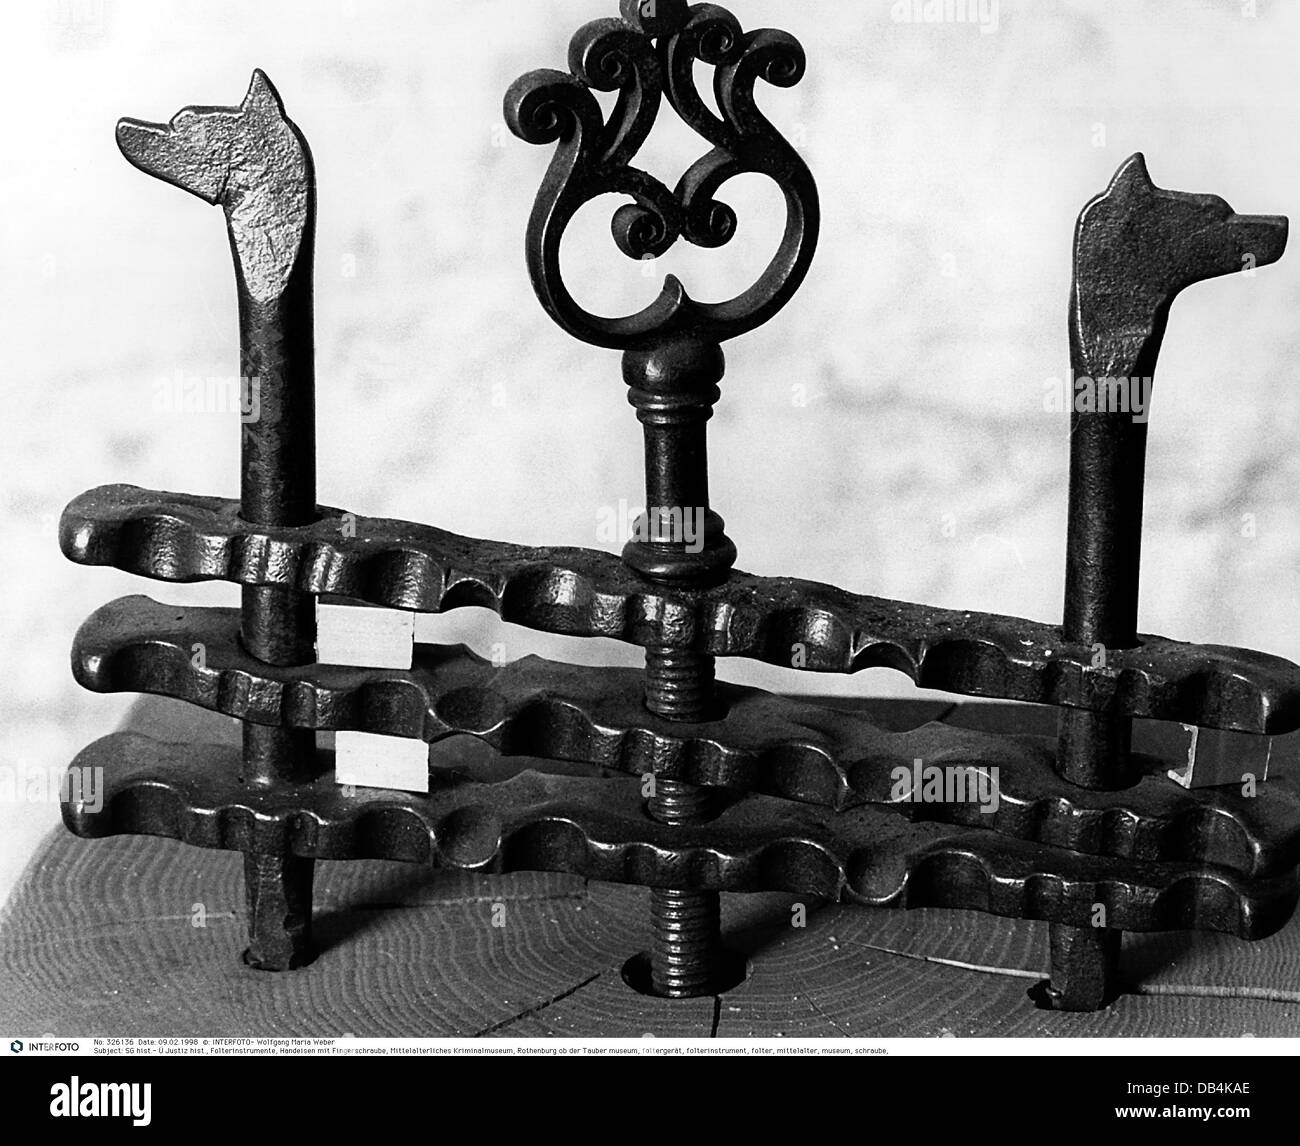 justice, instrument of torture, hand iron with thumb screw, museum of medieval crimes, Rothenburg ob der Tauber, historic, historical, thumbscrews, torture device, instruments of torture, torture devices, medieval times, Middle Ages, technics, chain, chains, Additional-Rights-Clearences-Not Available Stock Photo